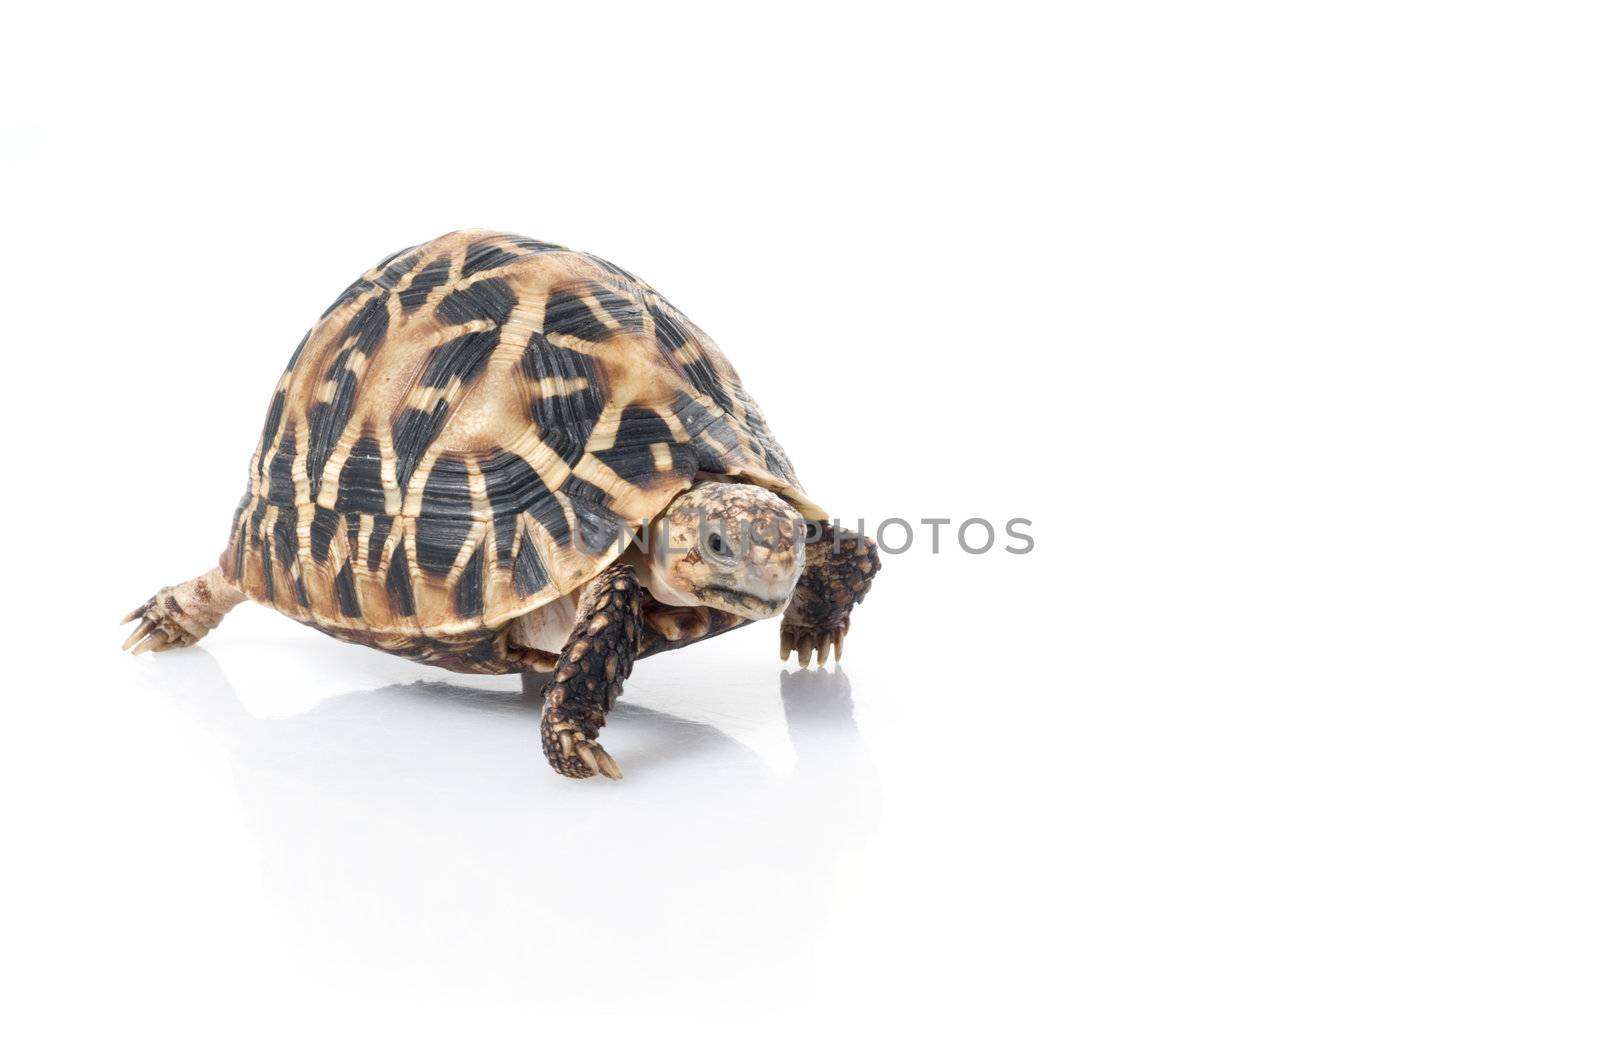 Indian Star Tortoise by Njean